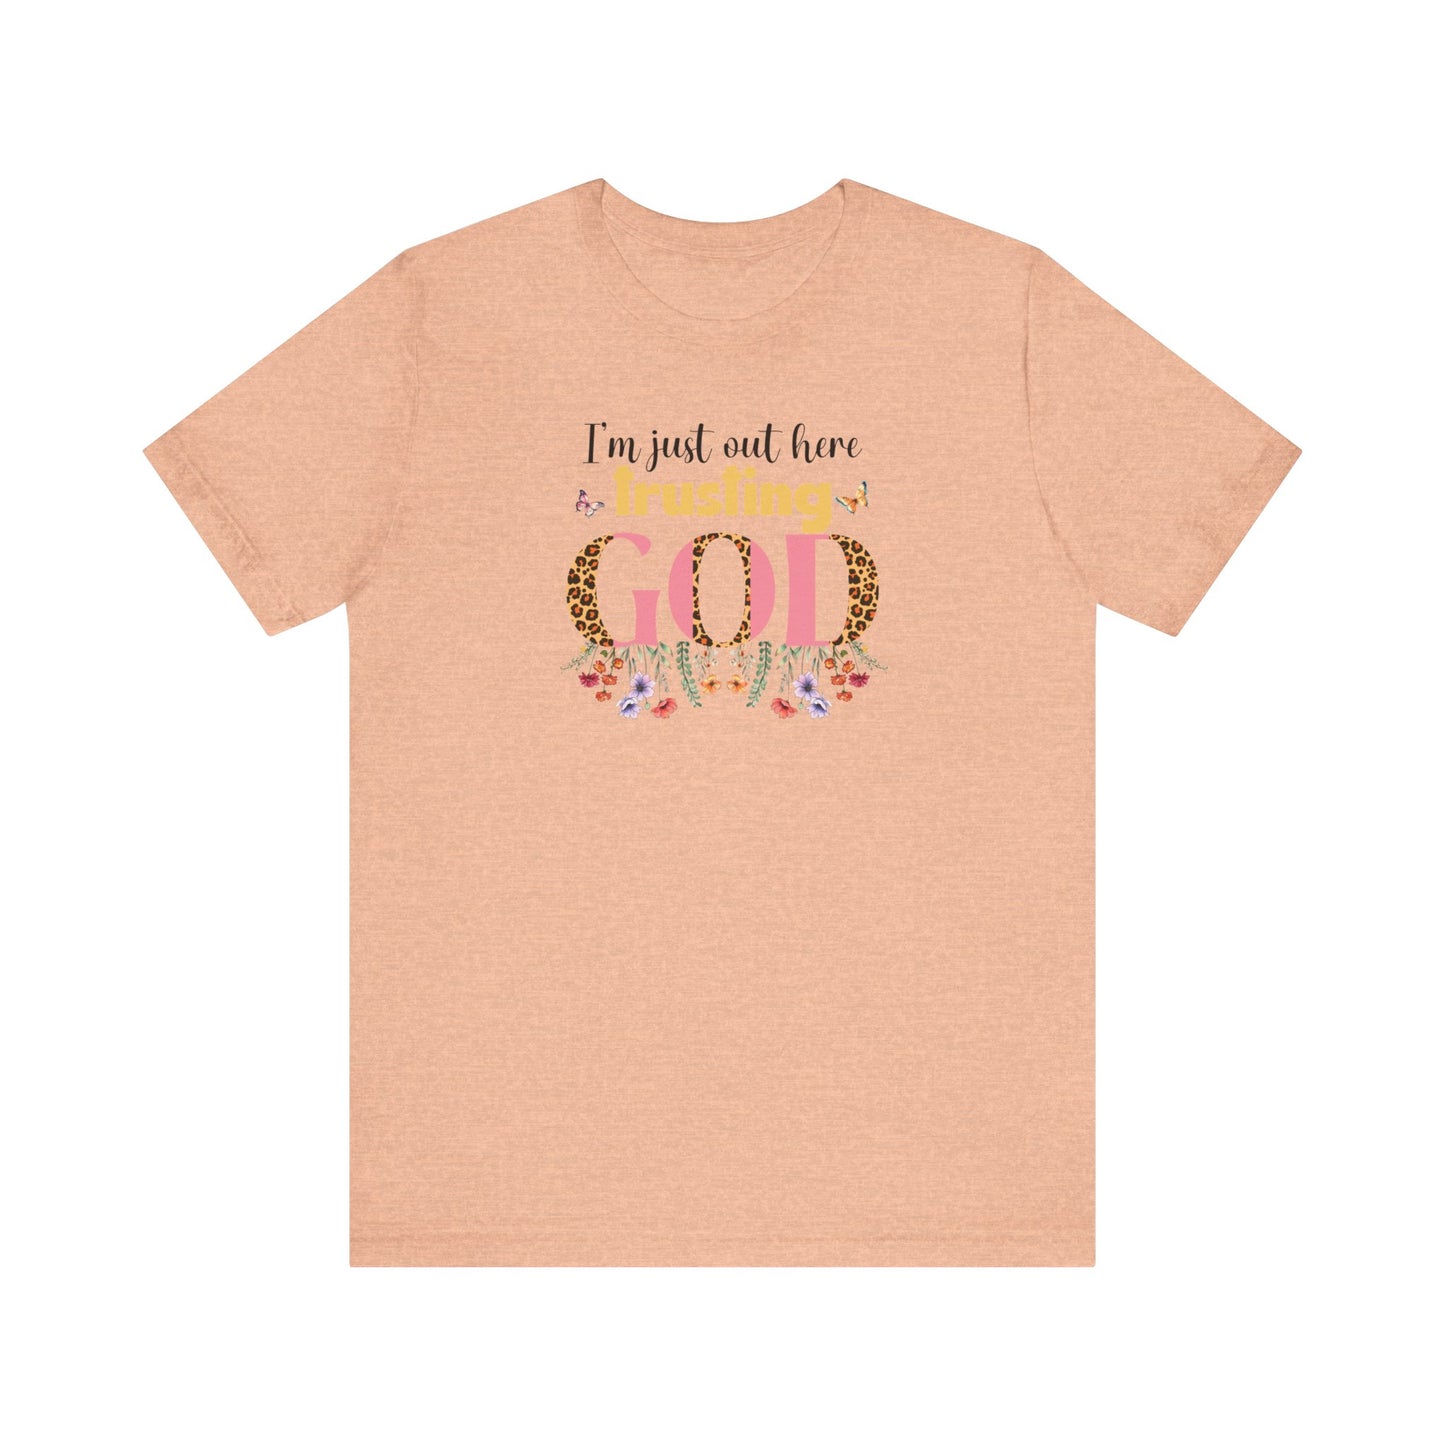 I'm Just Out Here Trusting God Shirt, Mother's Day Gift, Mom Floral Tee, Mama Tshirt (Mom-24)